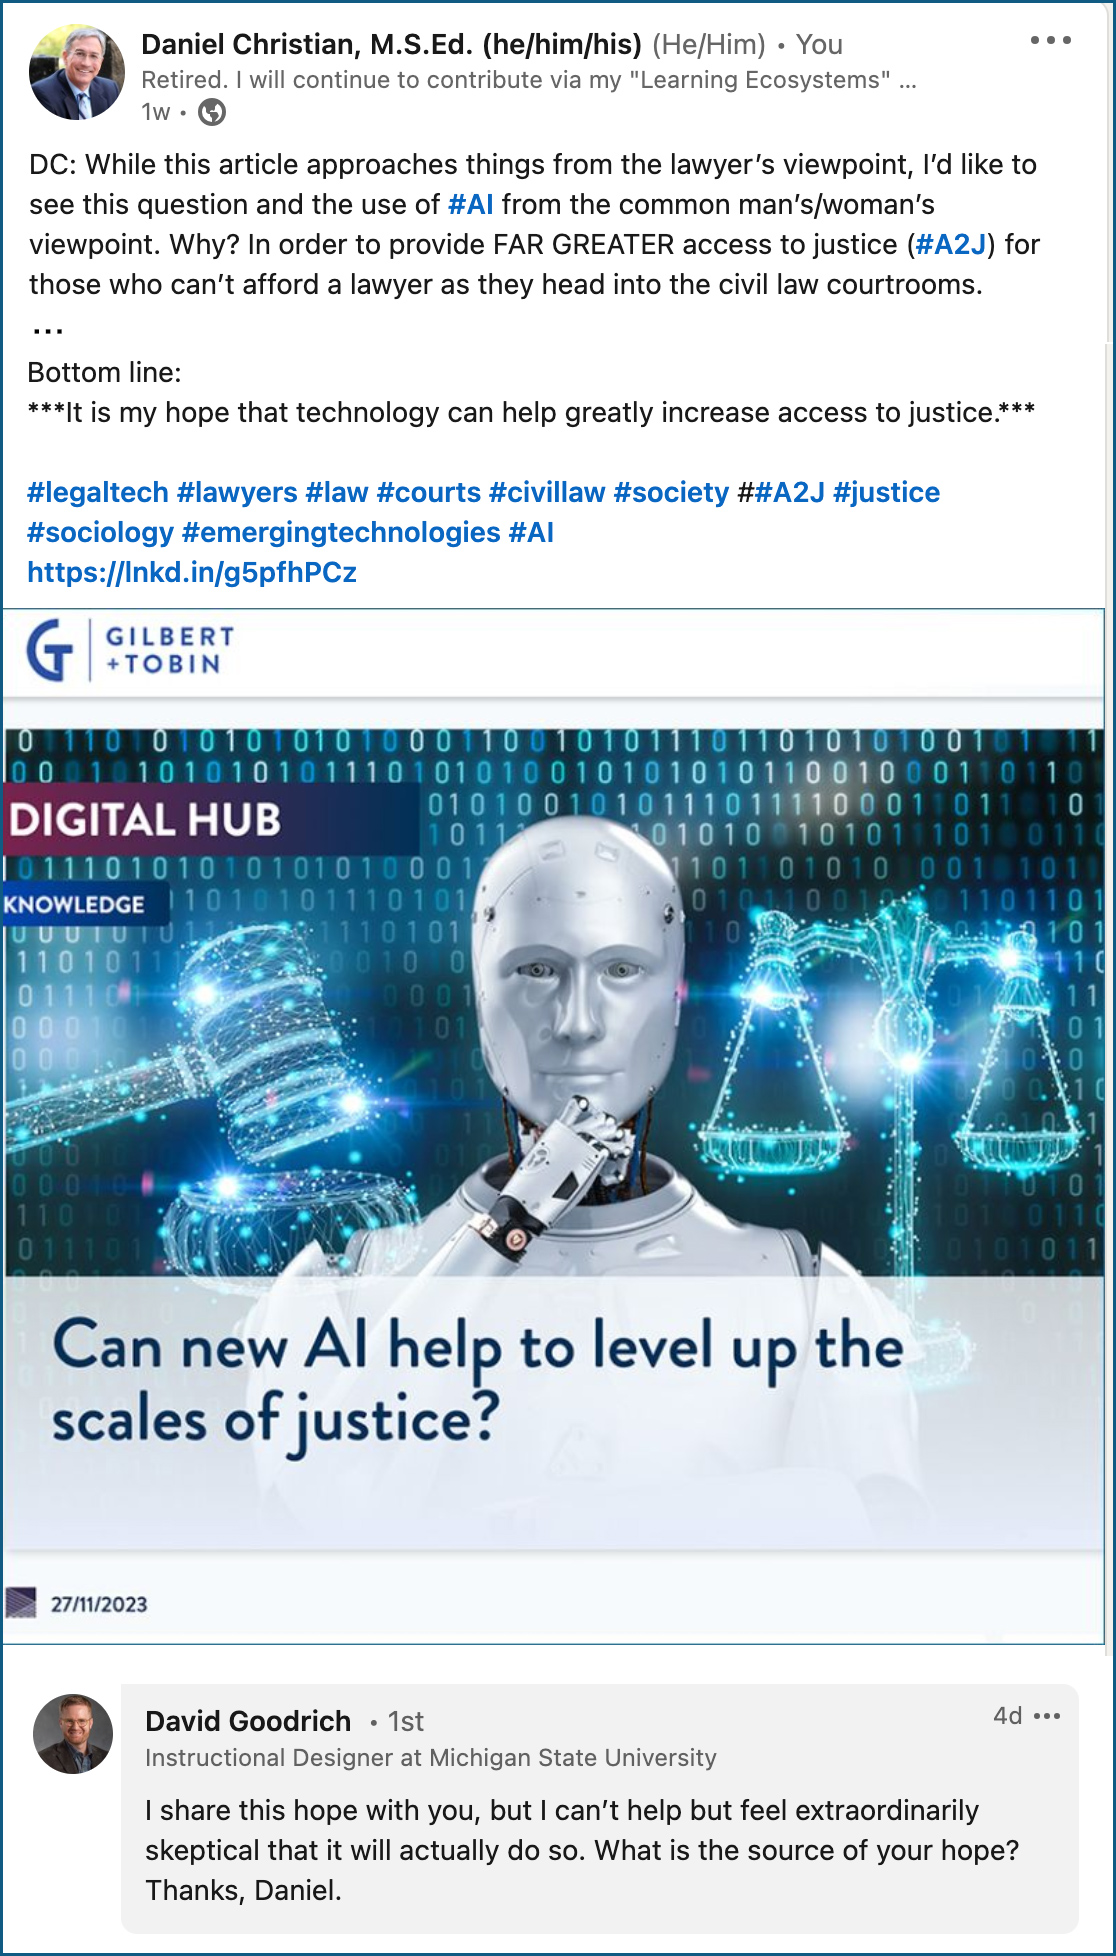 Can new AI help to level up the scales of justice?